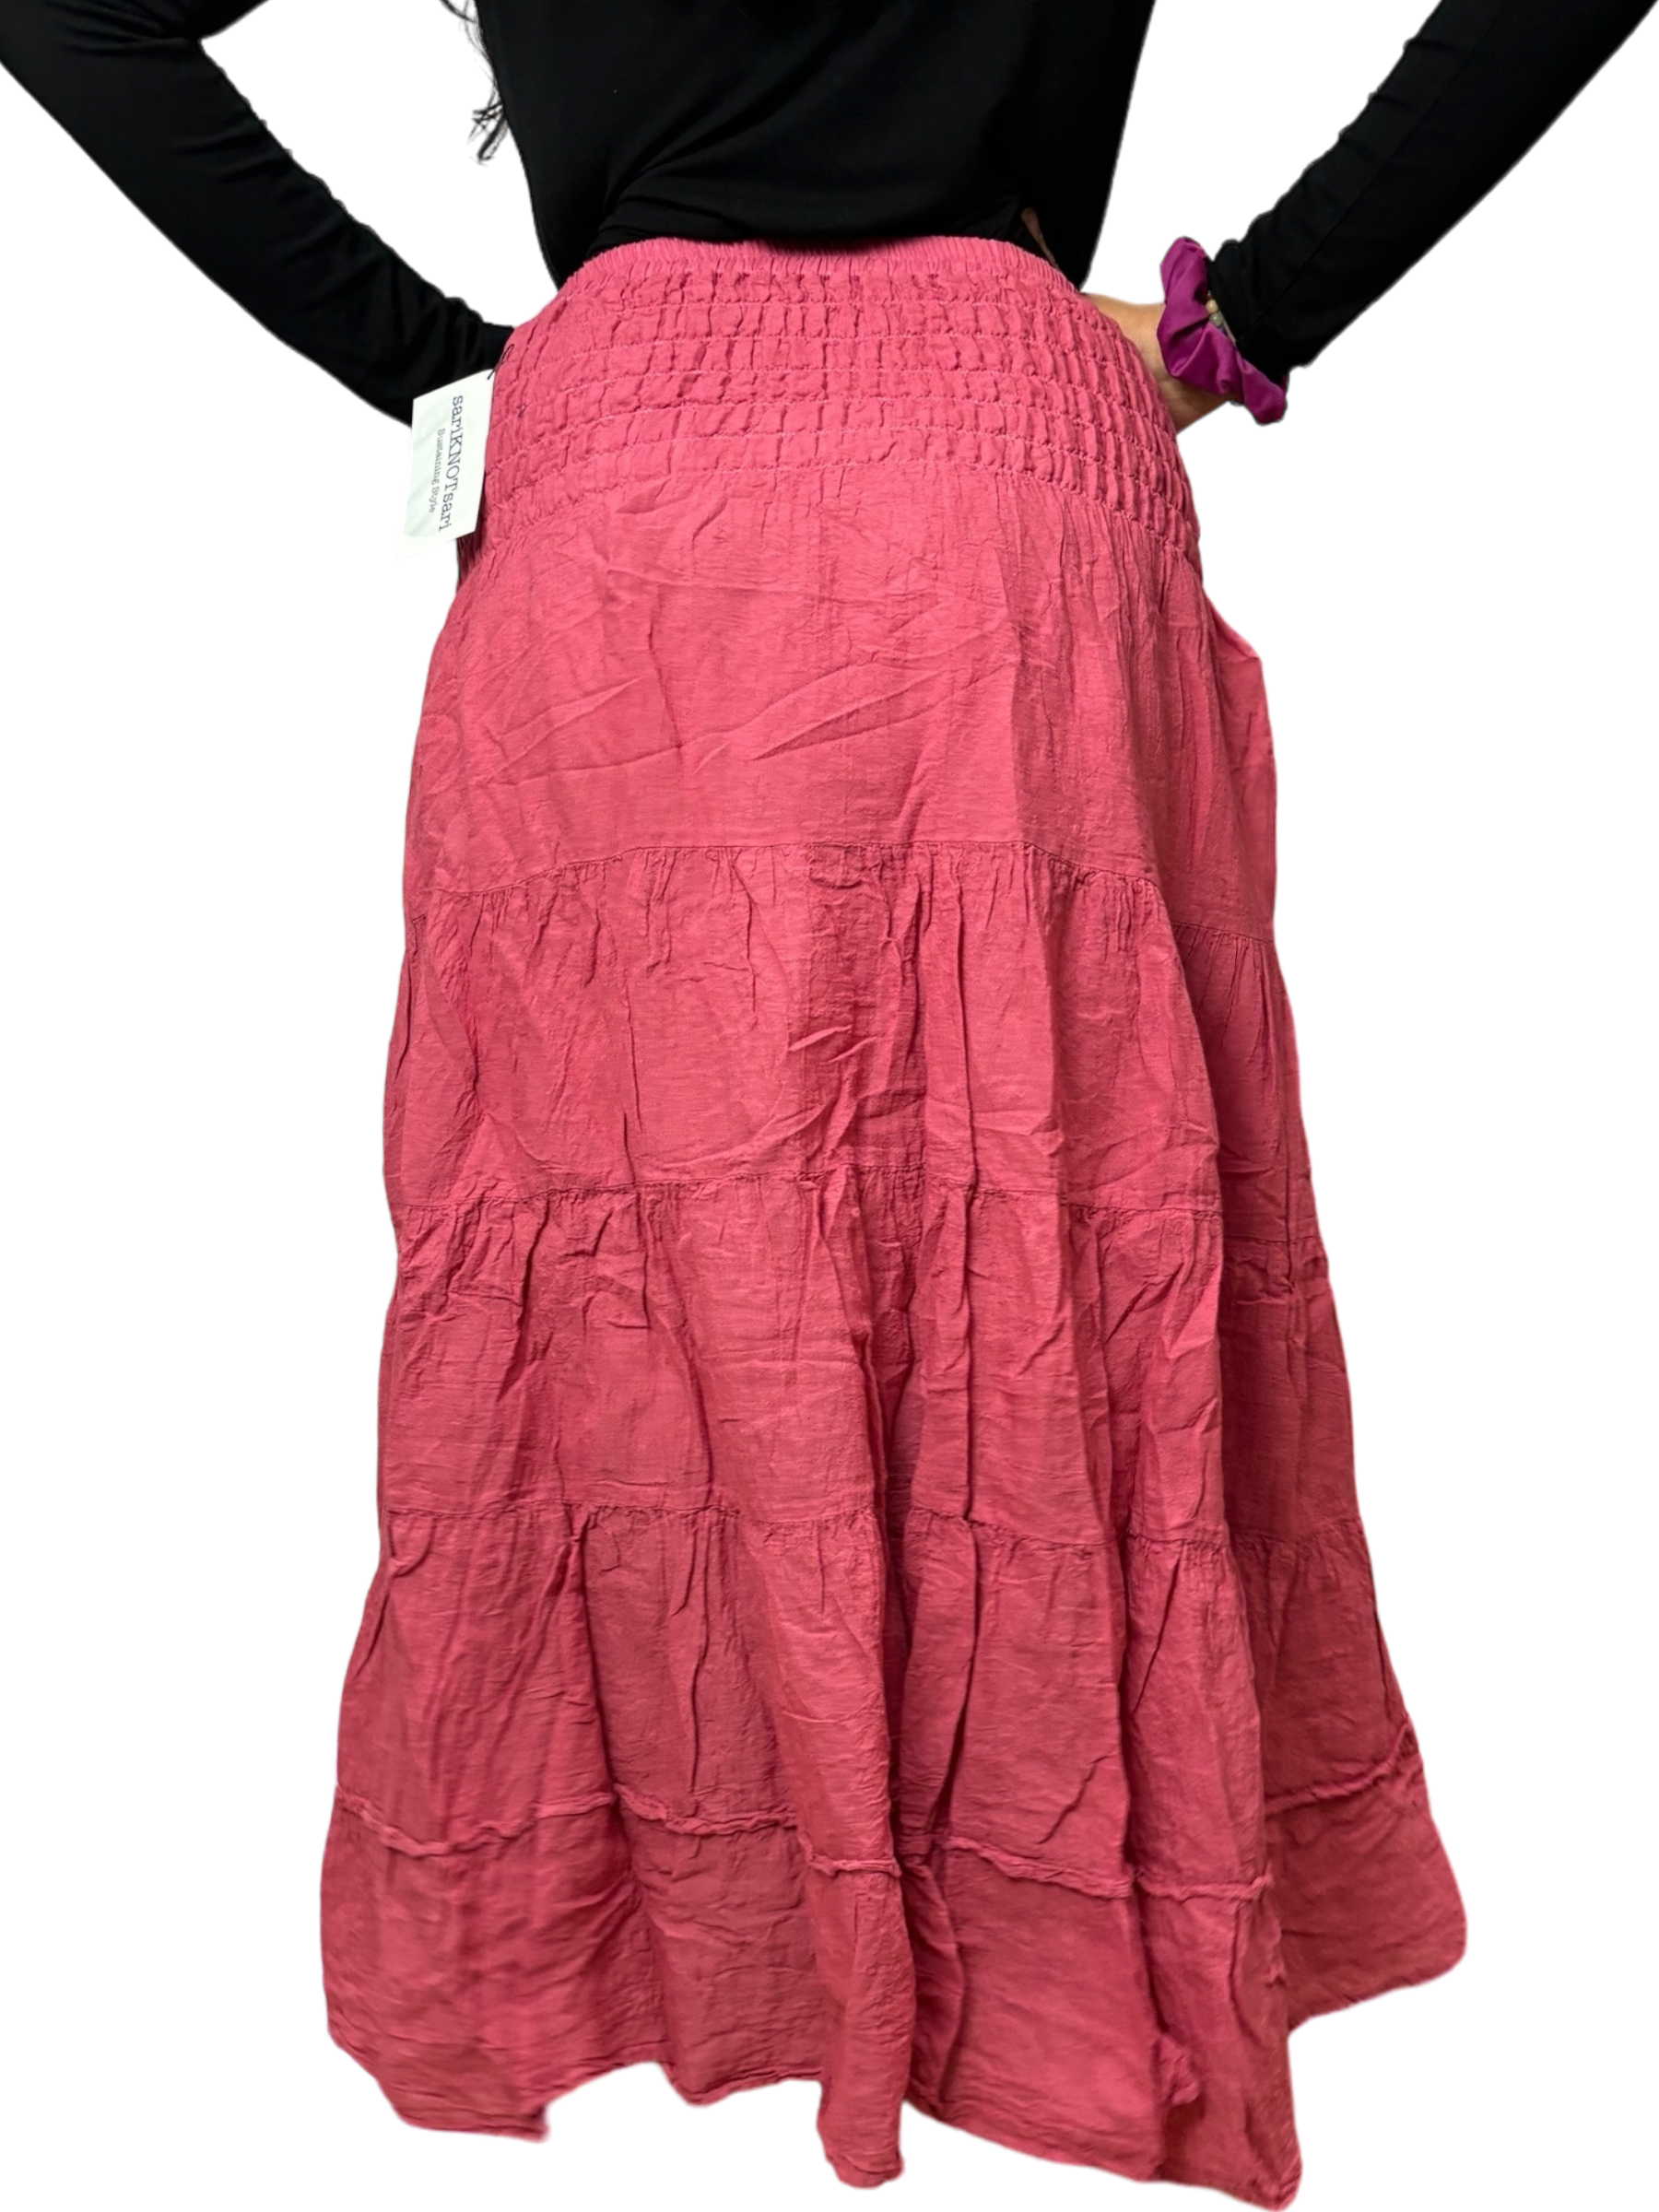 Deep Rose Cotton Voile Tiered Skirt